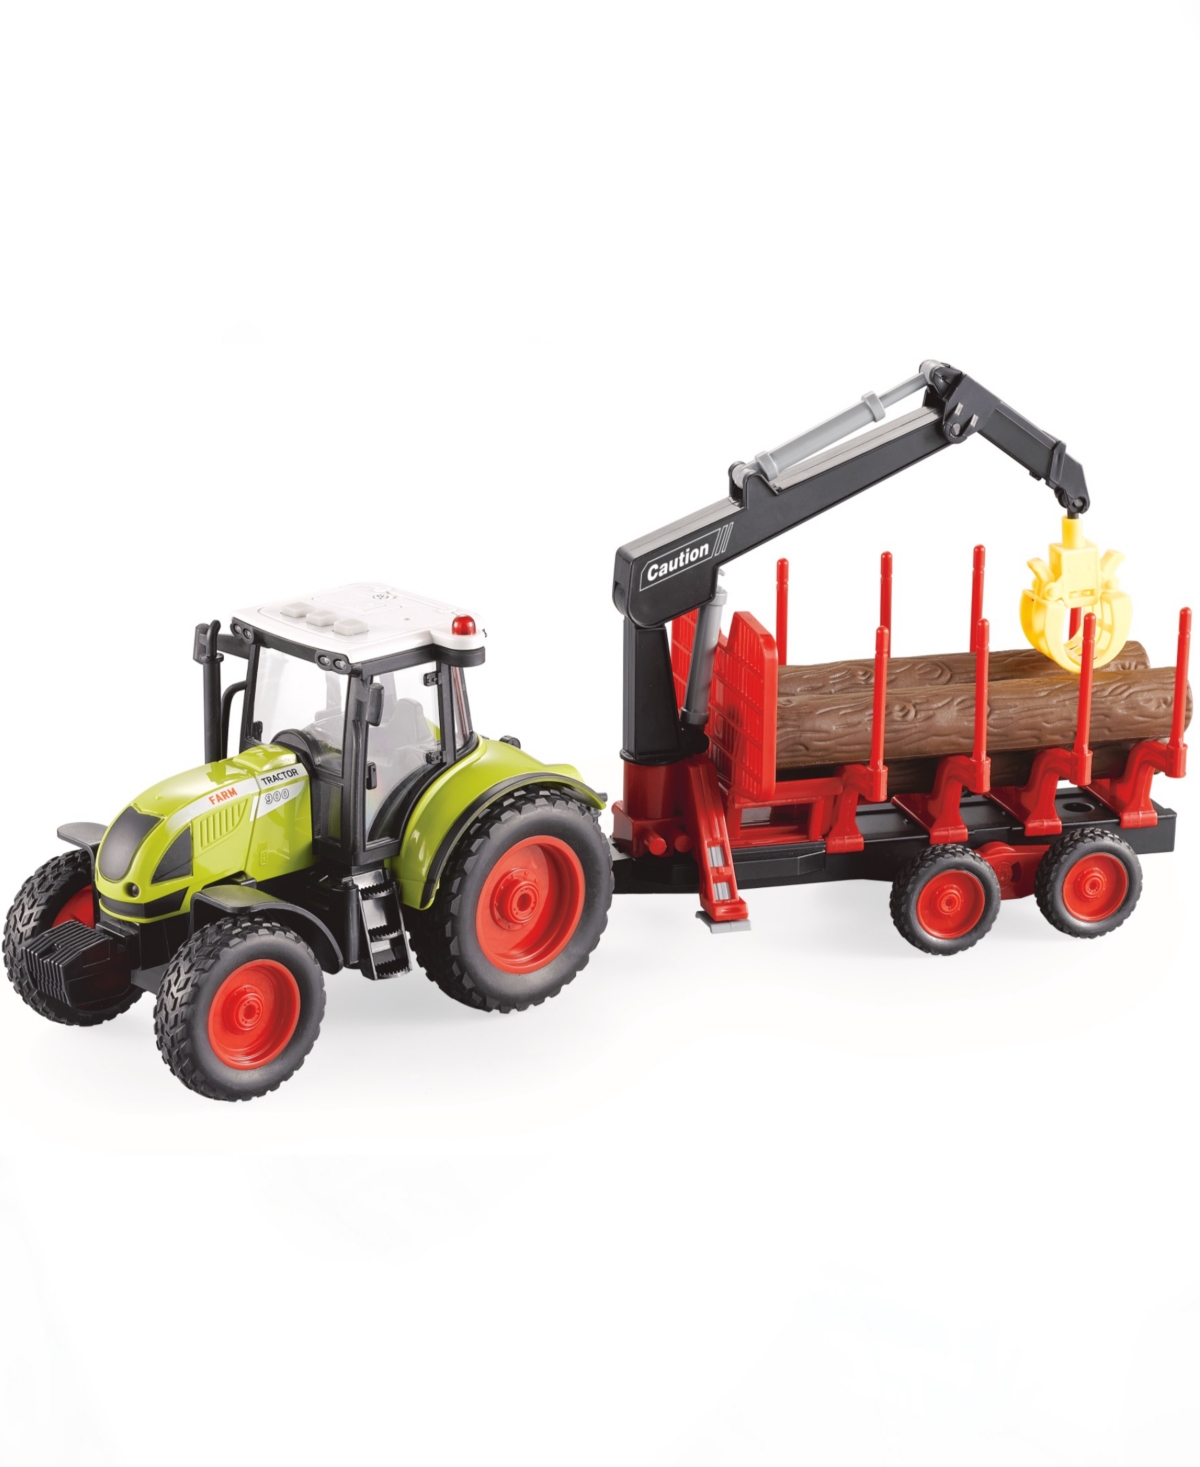 Big Daddy Babies' Farmland Lumber Transport With Excavator Arm Farming Tractor Trailer In Multi Colored Plastic